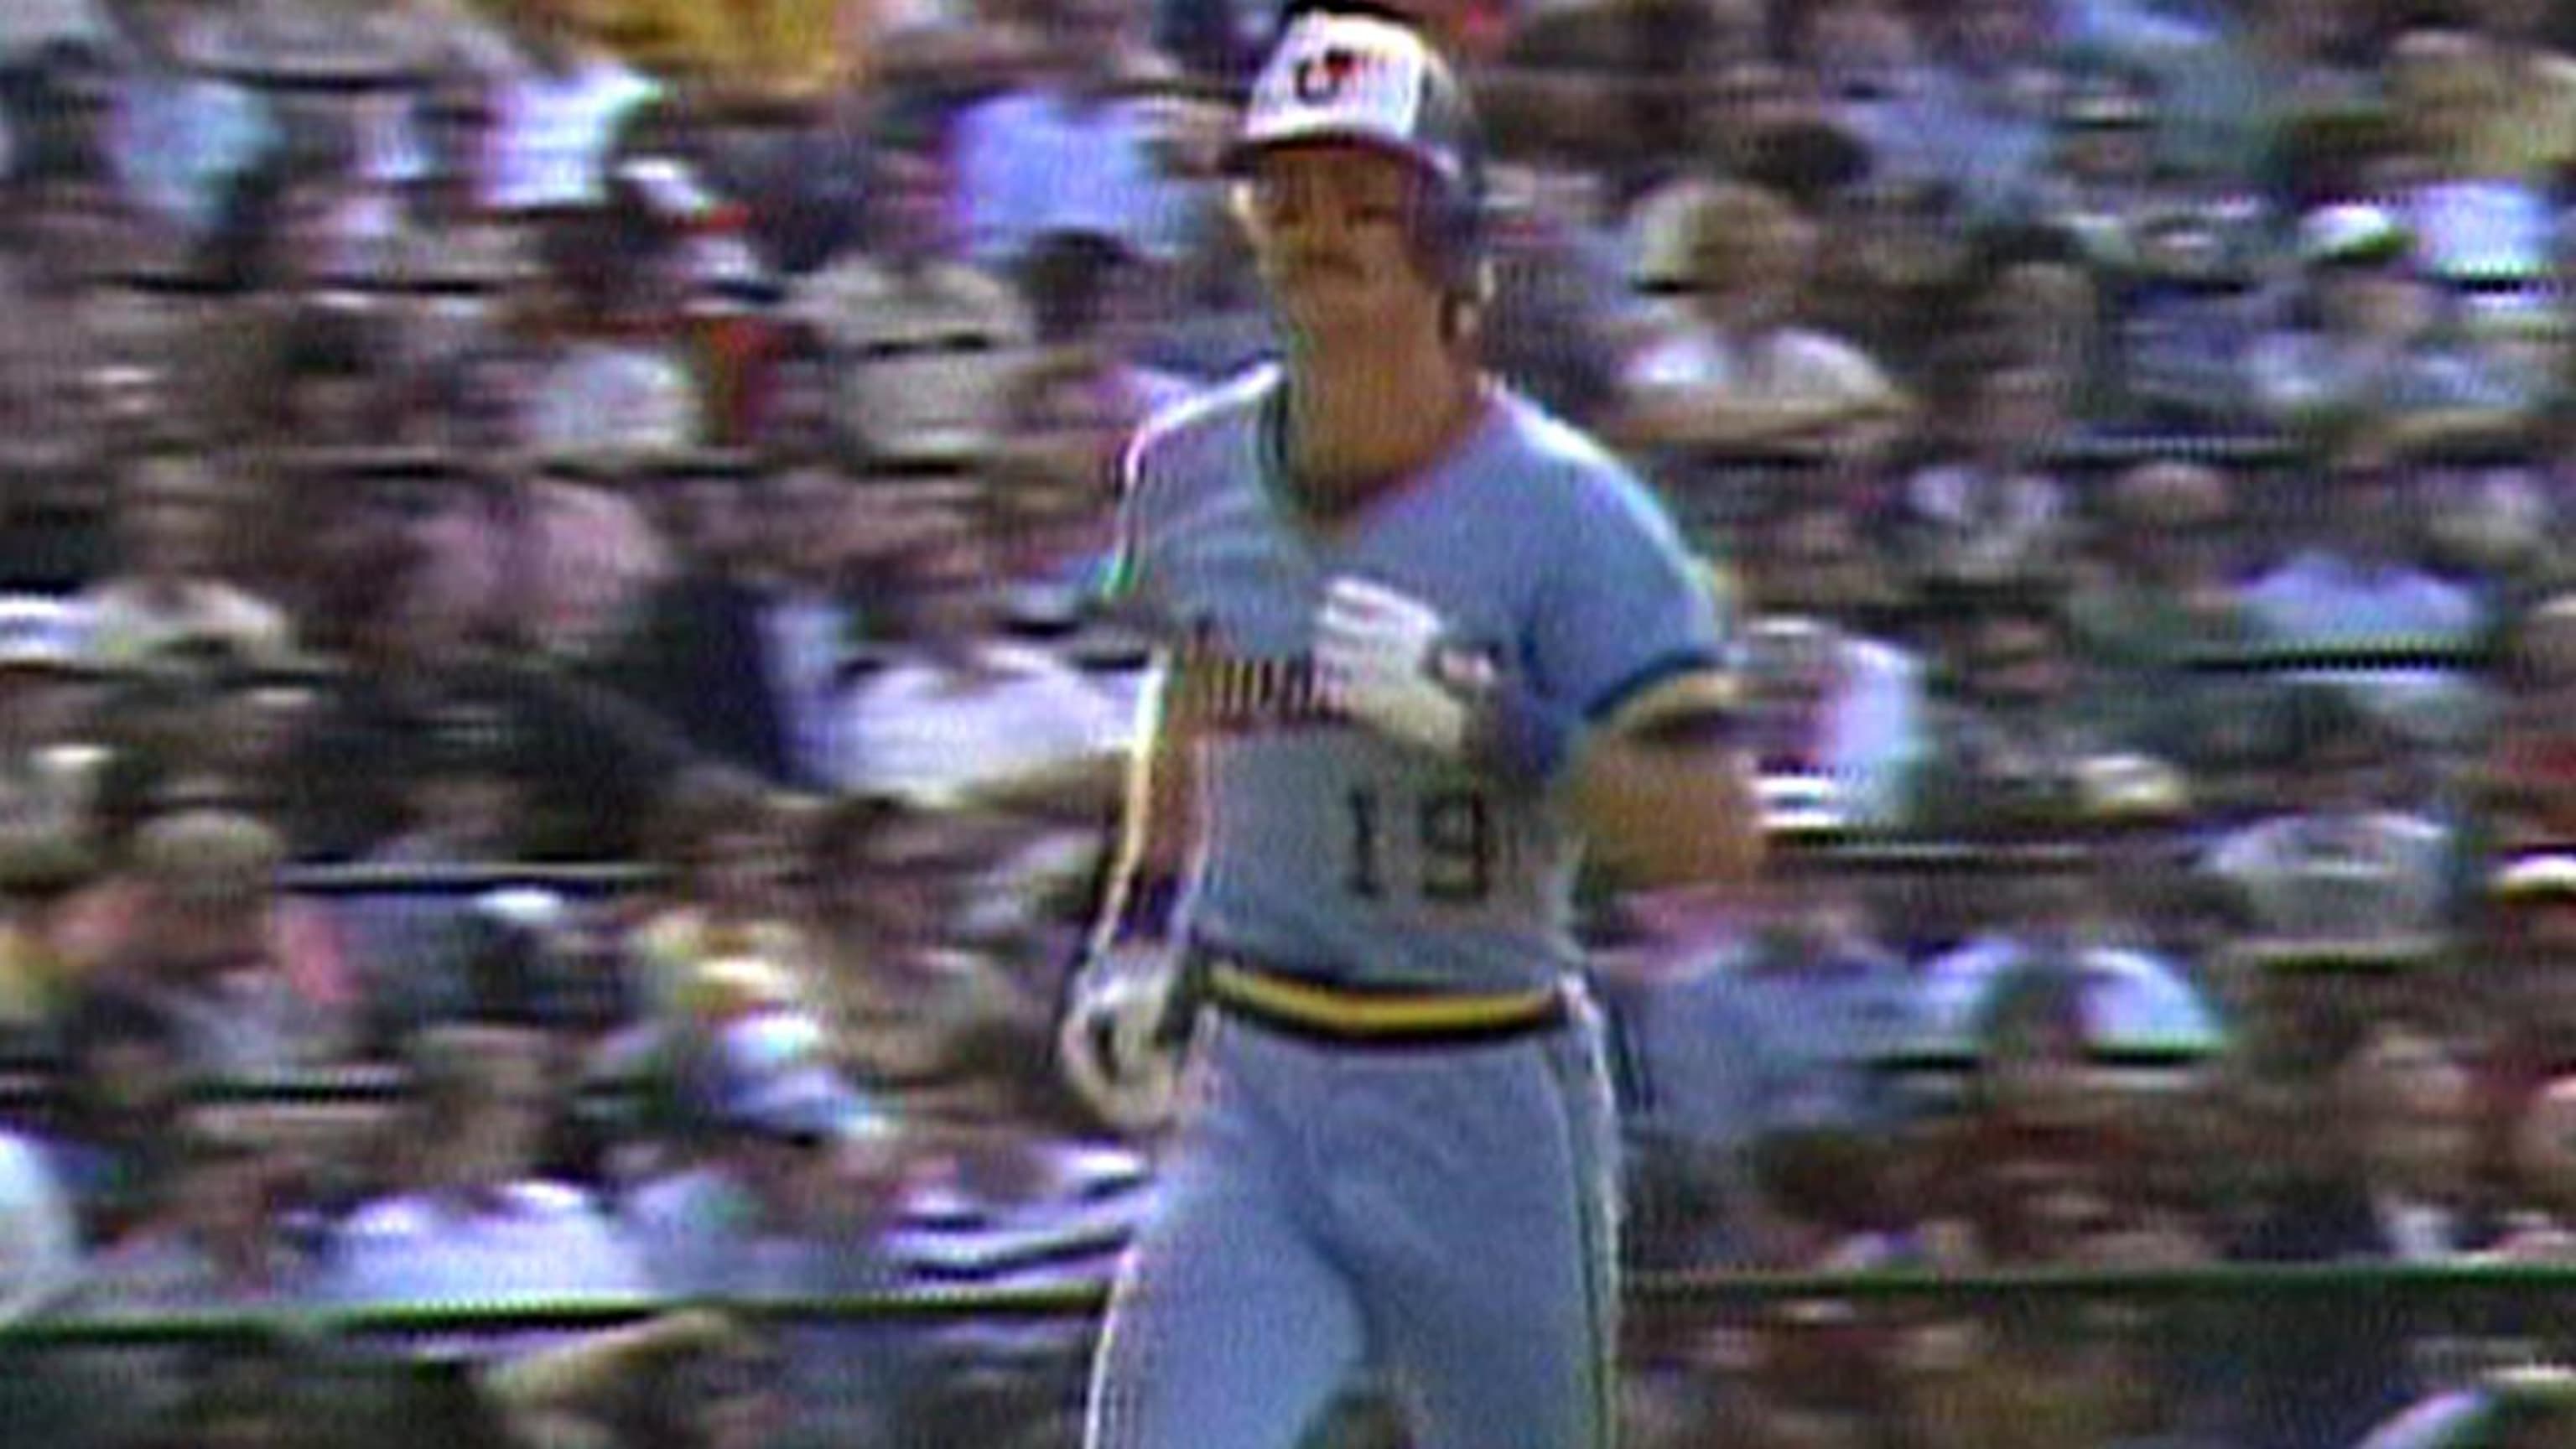 Robin Yount: The Greatest Milwaukee Brewer of Them All